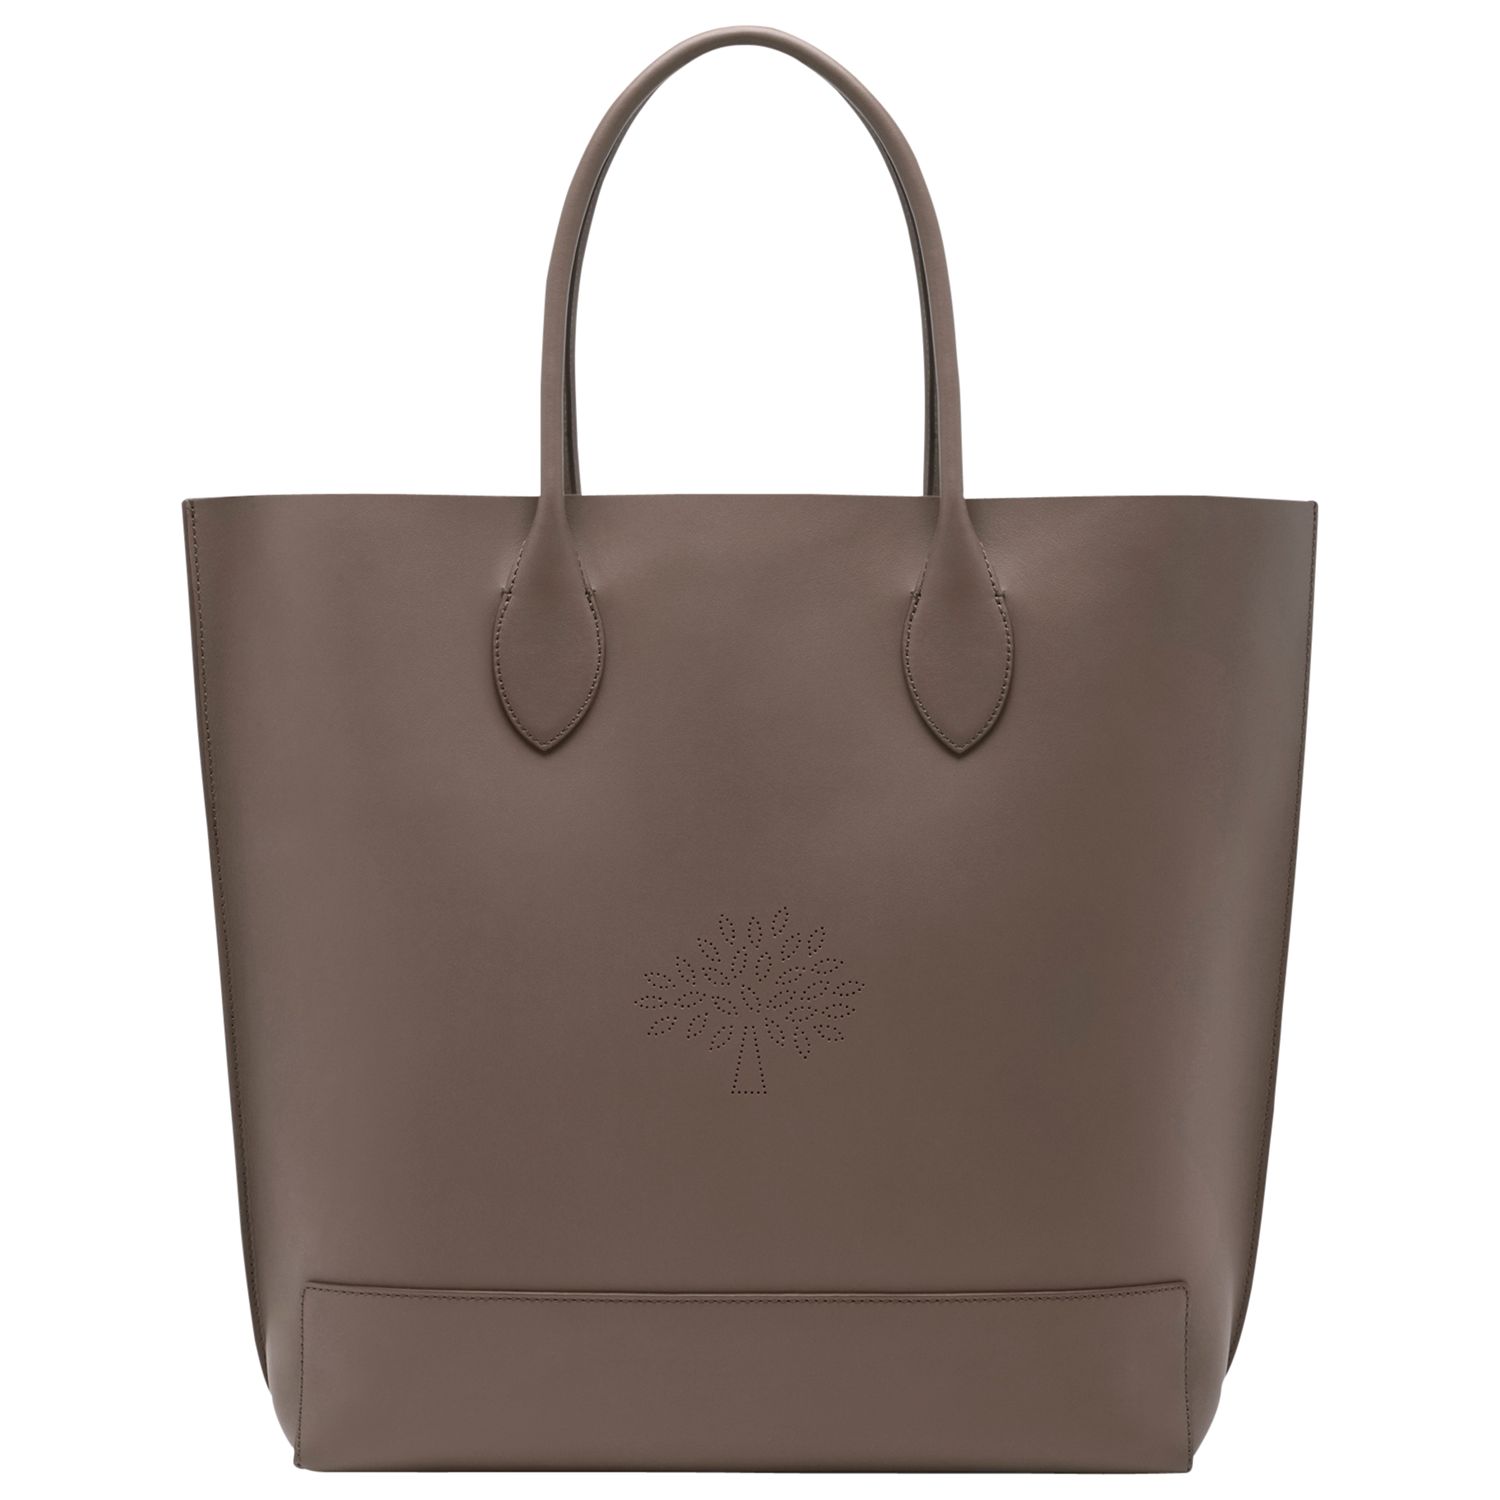 Mulberry Blossom Leather Tote Bag at John Lewis & Partners